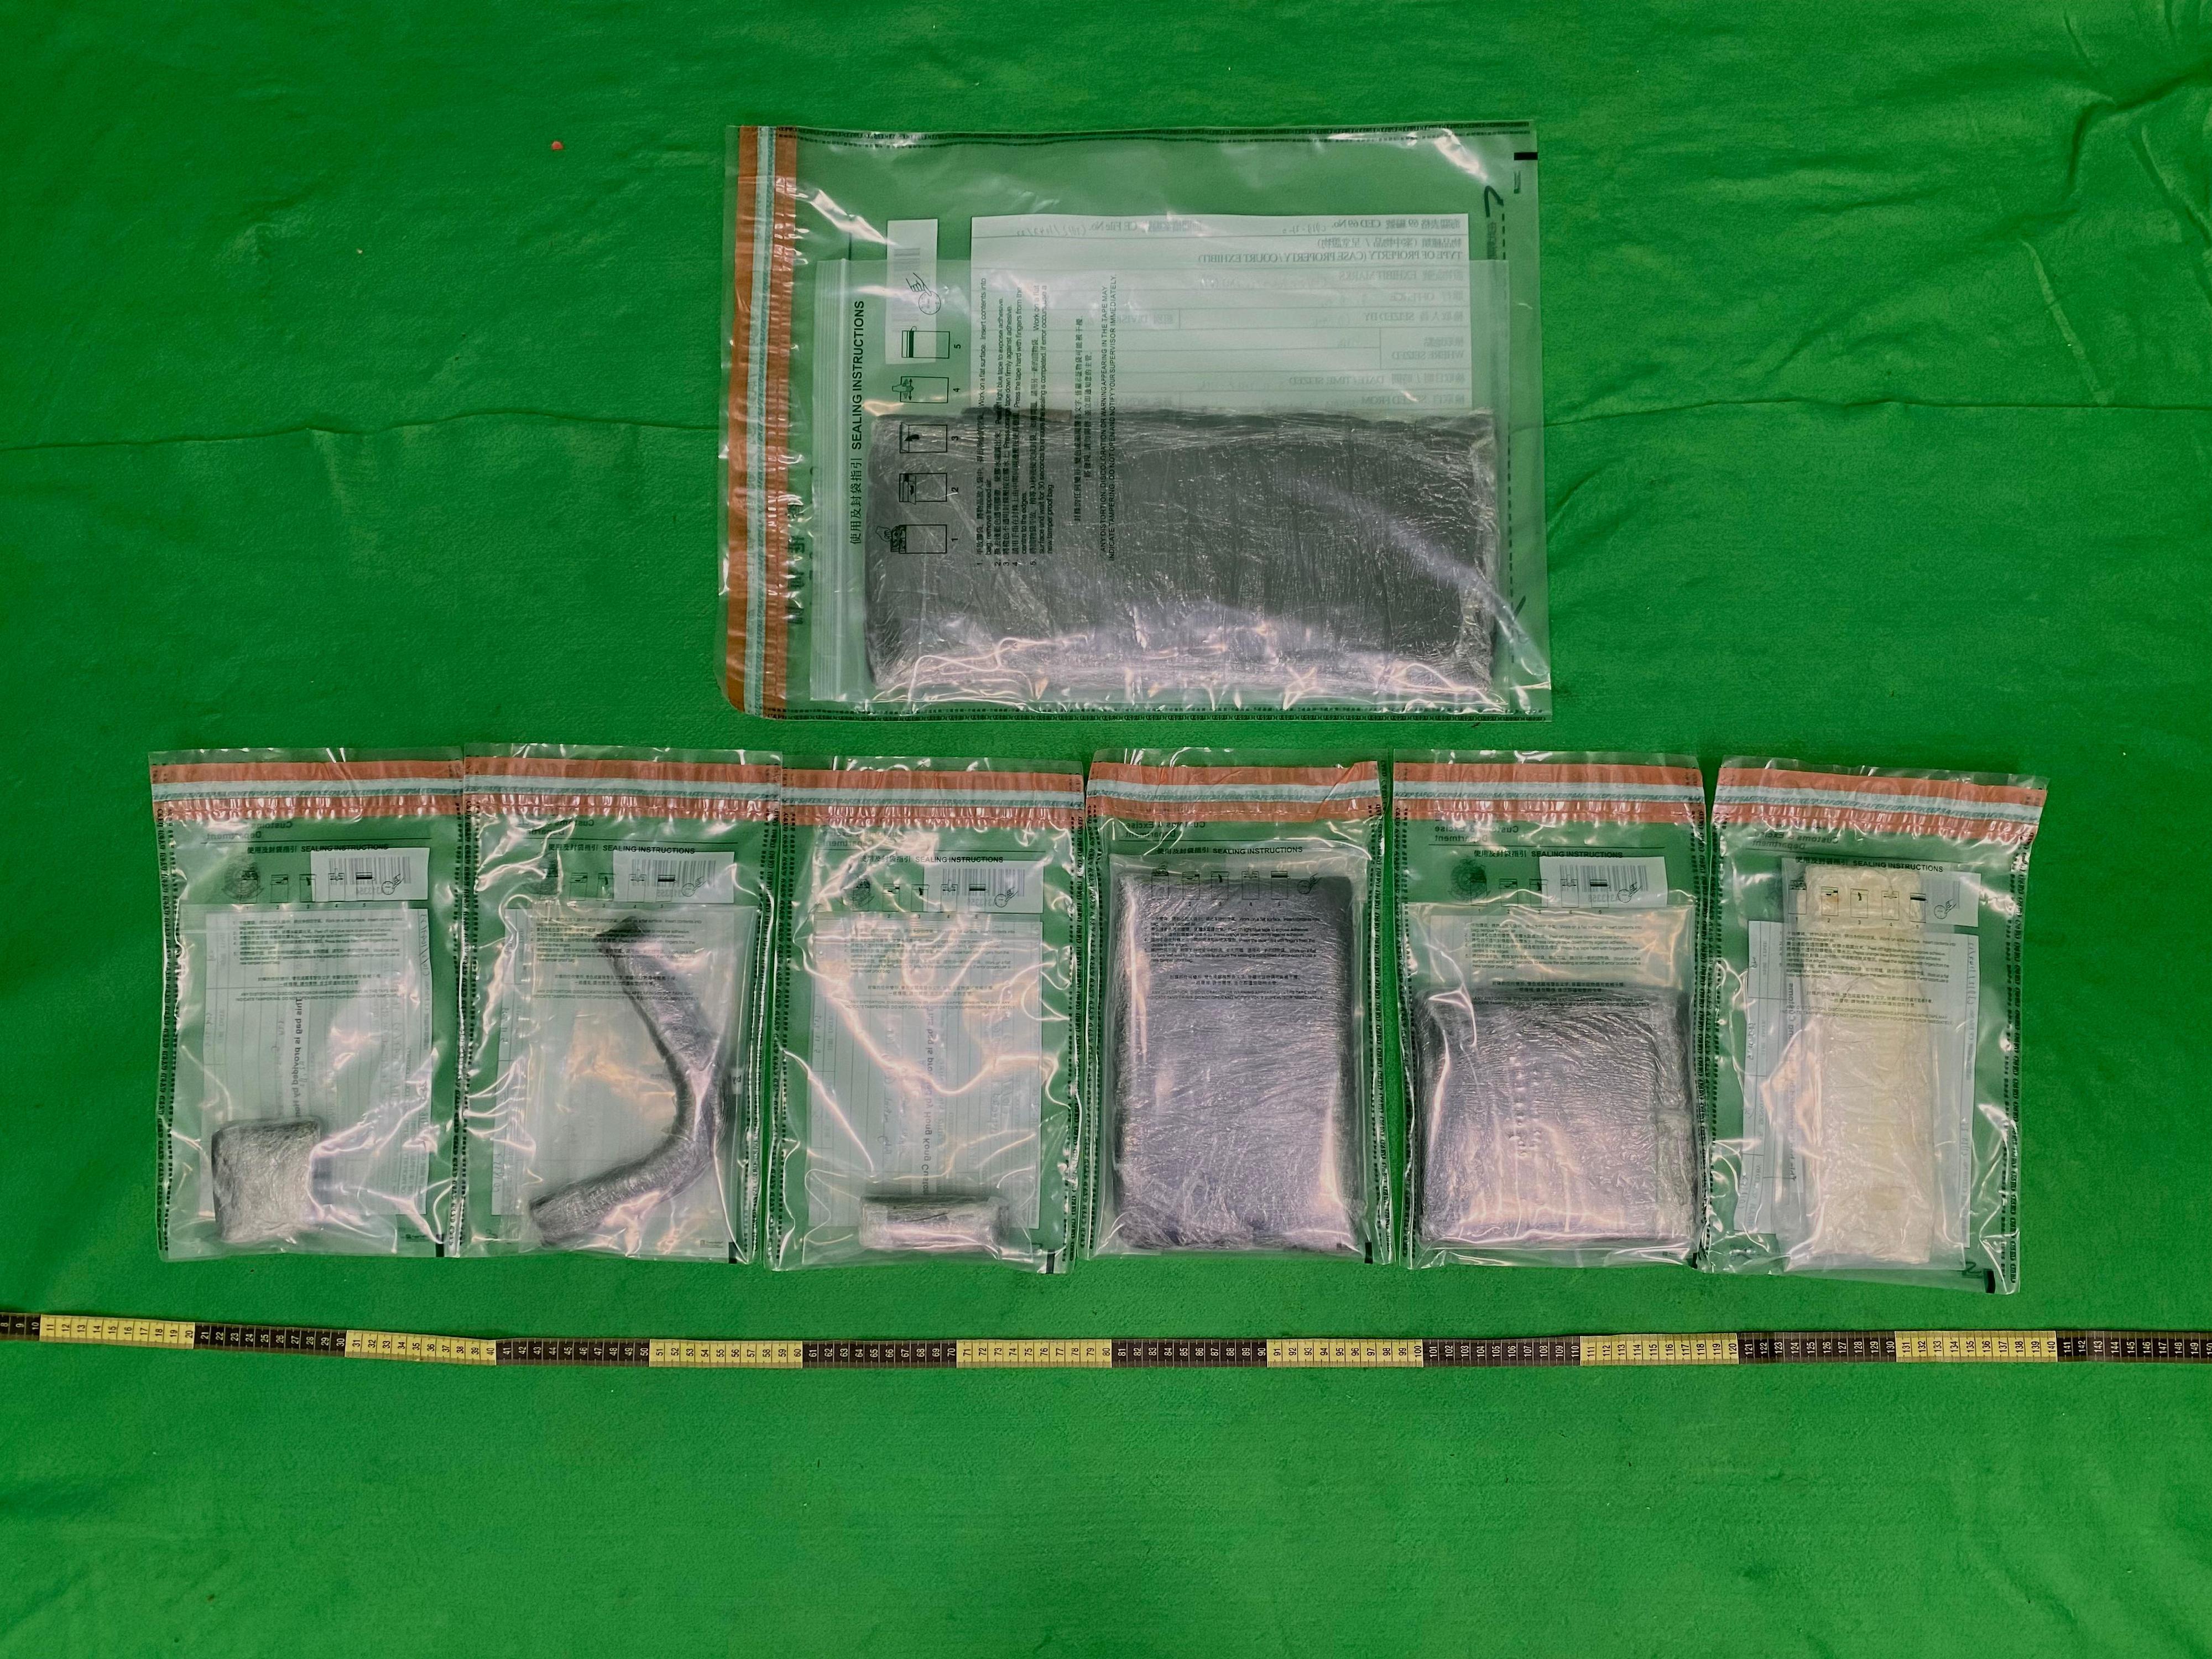 Hong Kong Customs yesterday (December 5) detected two passenger drug trafficking cases at Hong Kong International Airport and seized about 3.4 kilograms of suspected cannabis resin and about 500 grams of suspected cocaine with a total estimated market value of about $700,000. Photo shows the suspected cannabis resin and suspected cocaine seized in the first case.